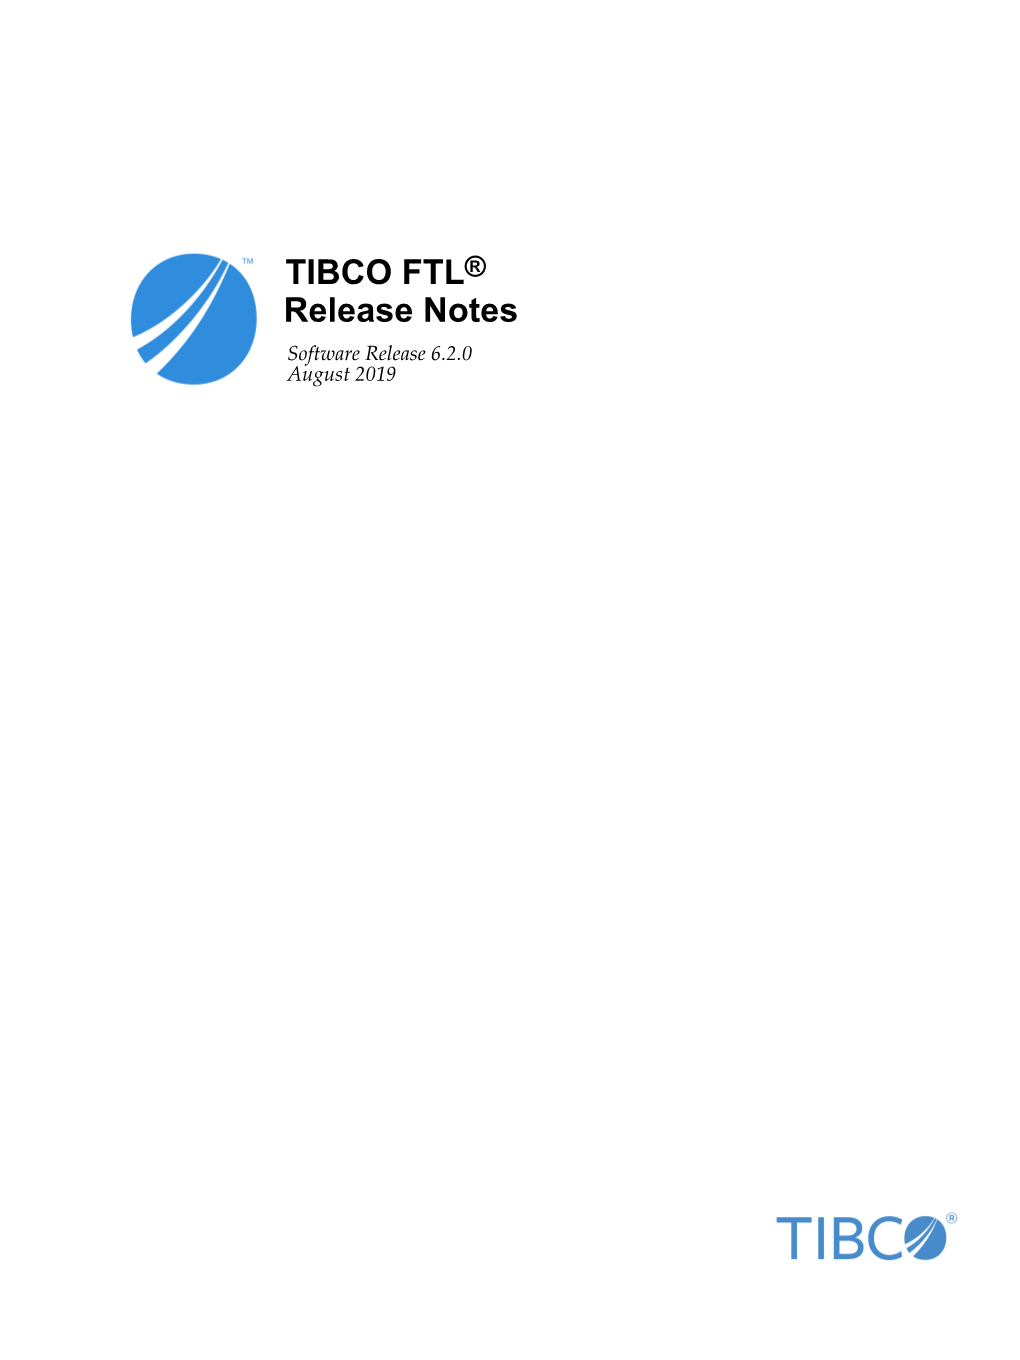 TIBCO FTL® Release Notes Software Release 6.2.0 August 2019 2